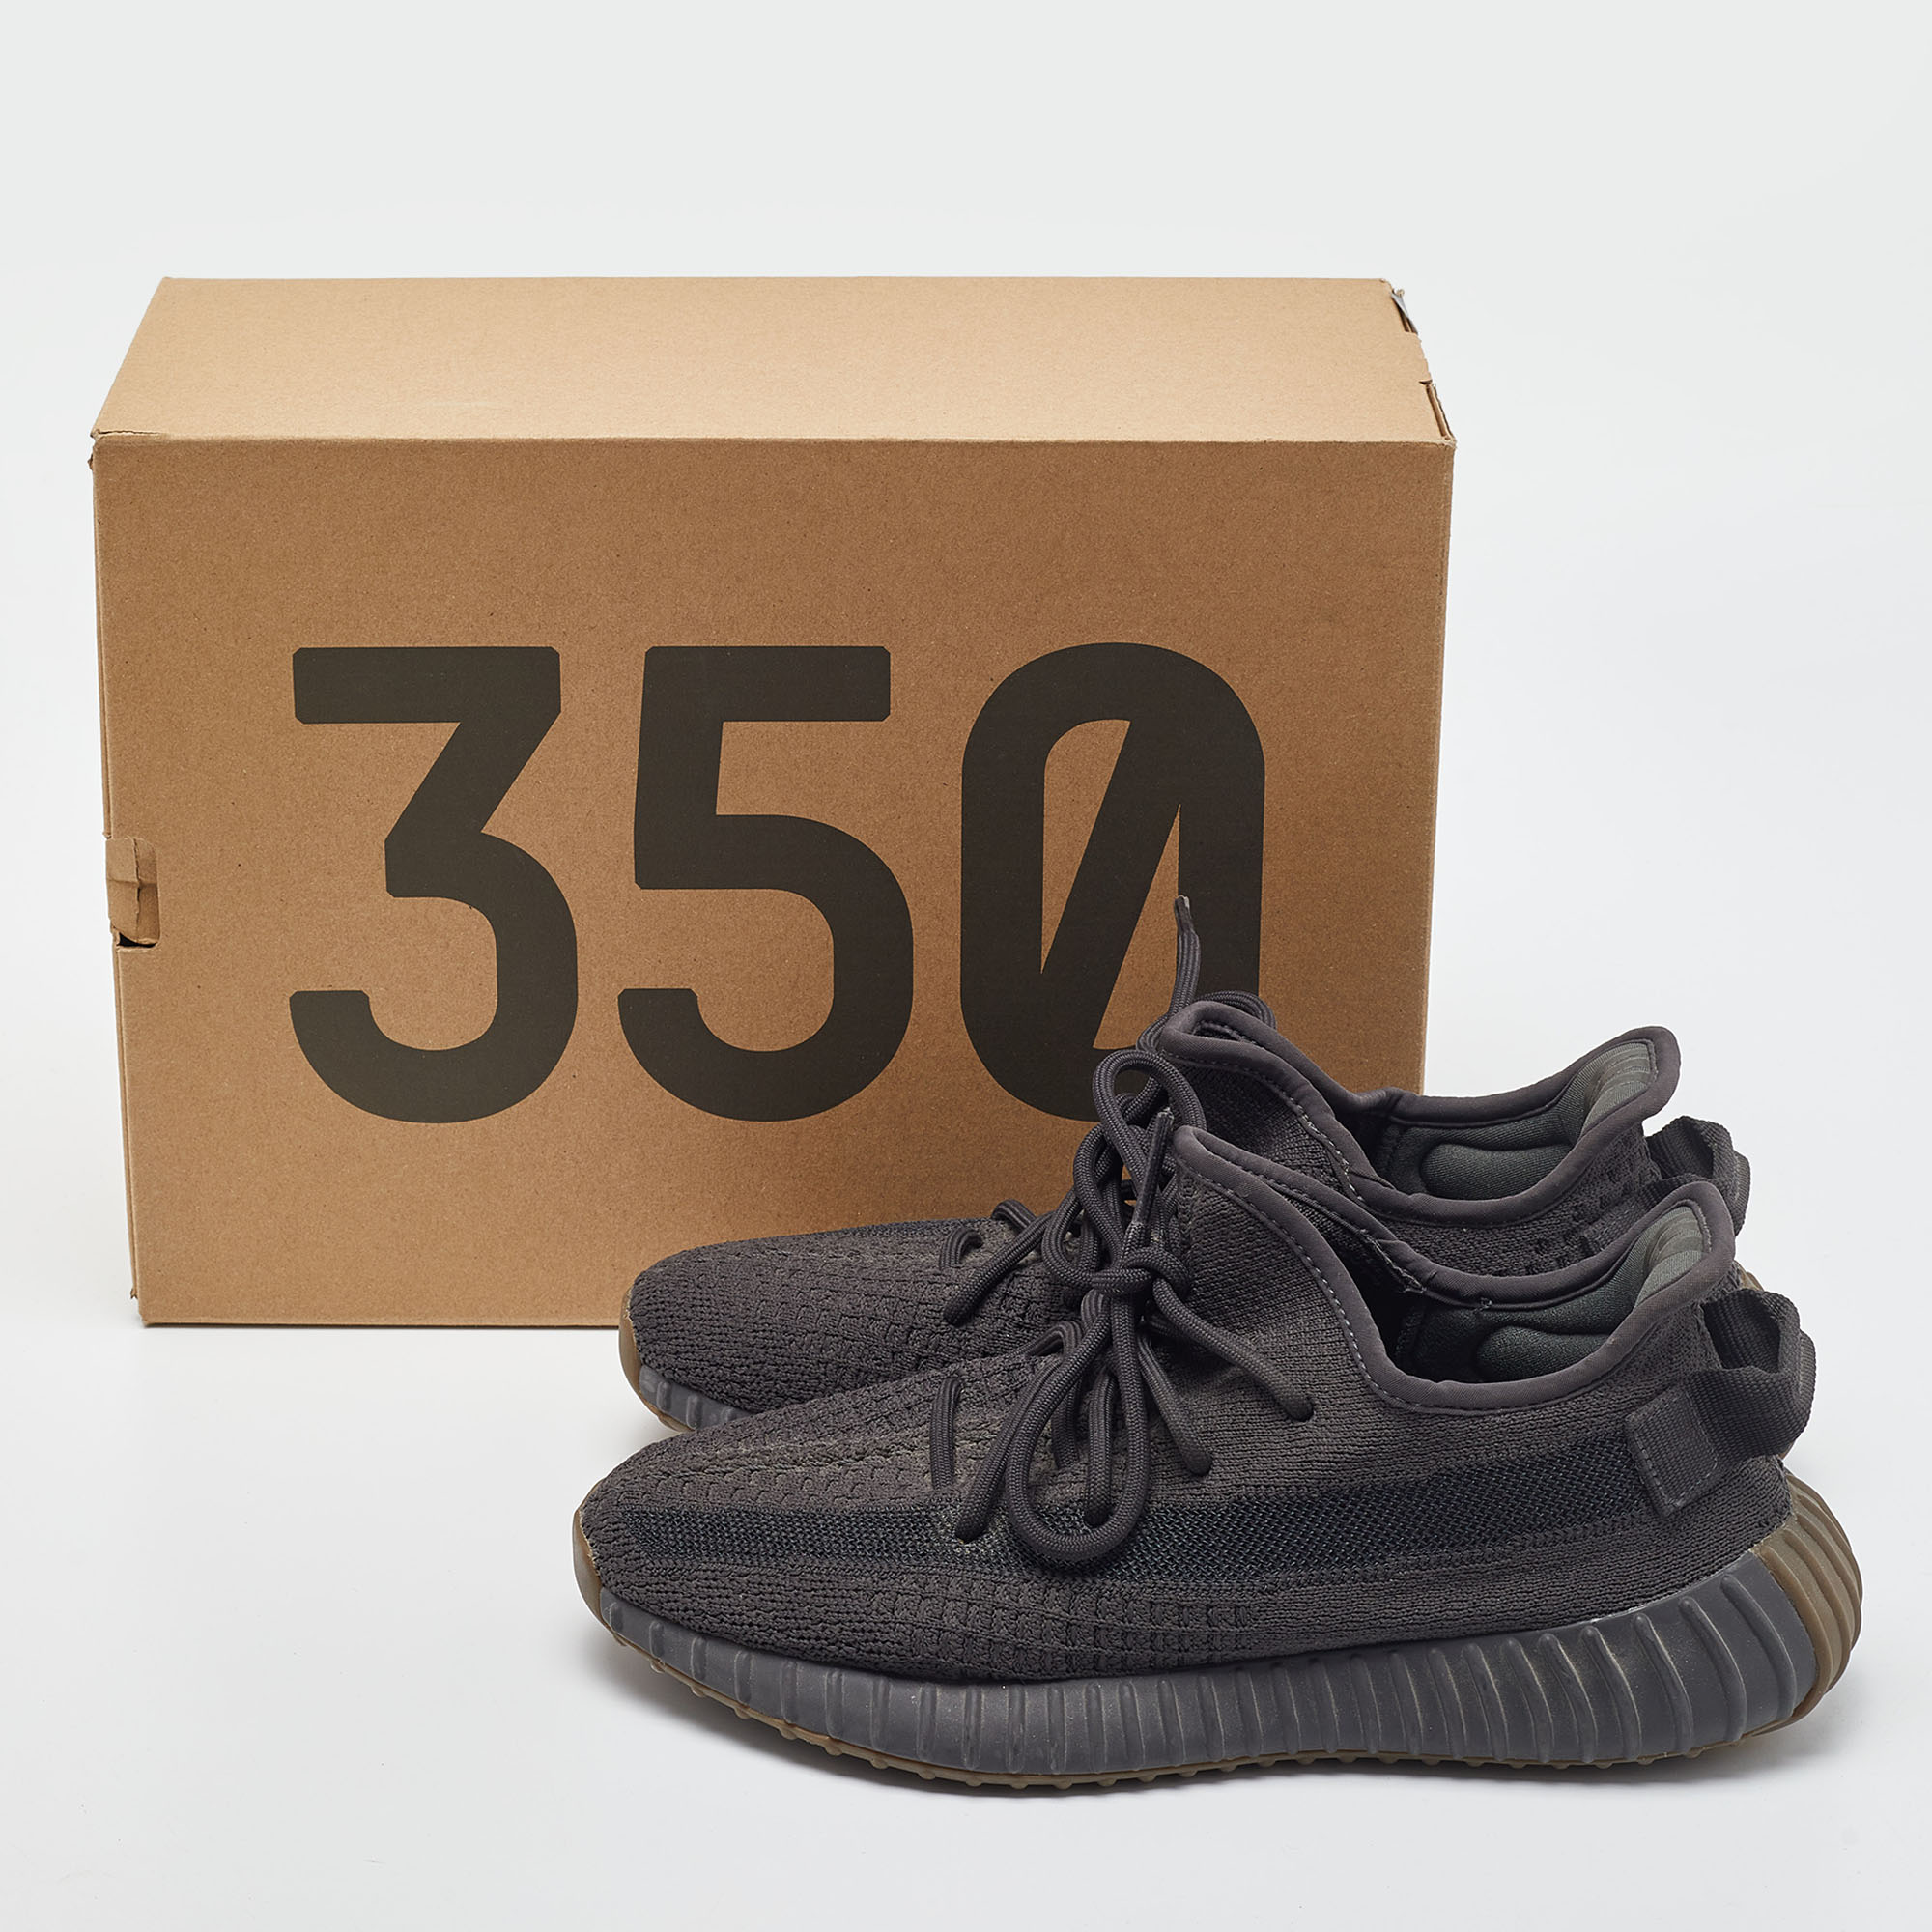 Yeezy X Adidas Black Knit Fabric Boost 350 V2 Cinder Sneakers Size 39 1/3